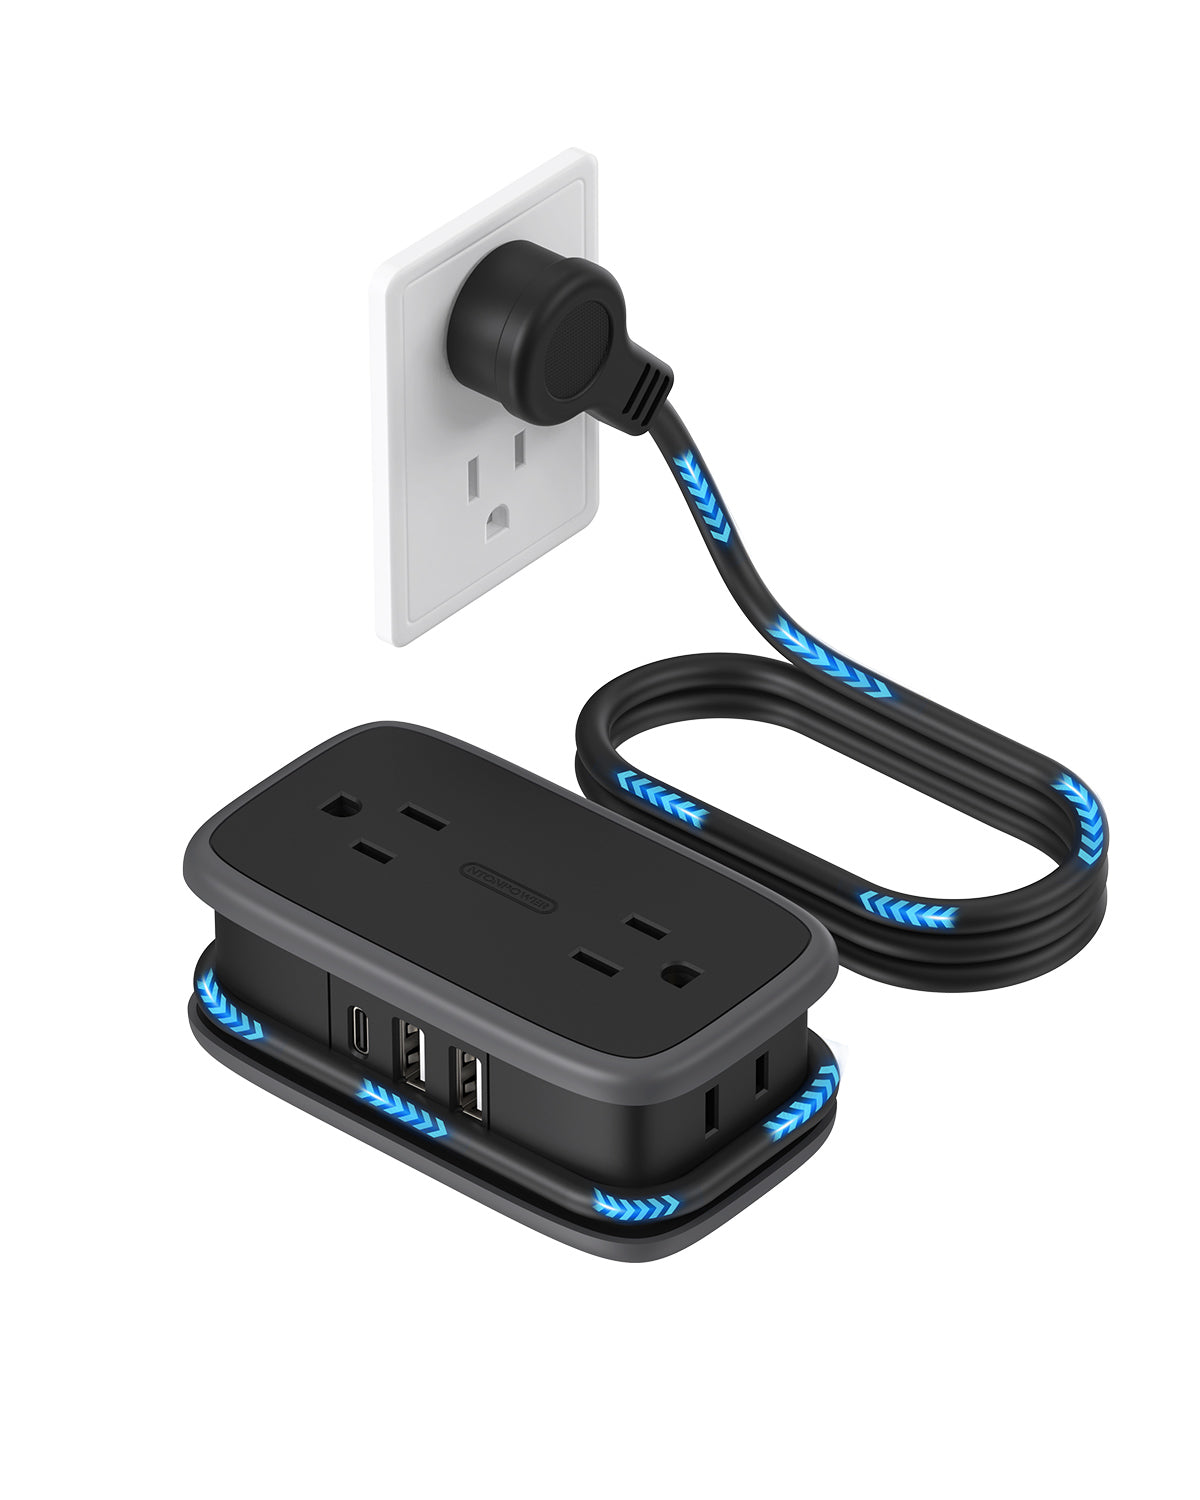 Ntonpower Pocket Power Strip 4 Outlets 3 USB Ports(1 Type C)